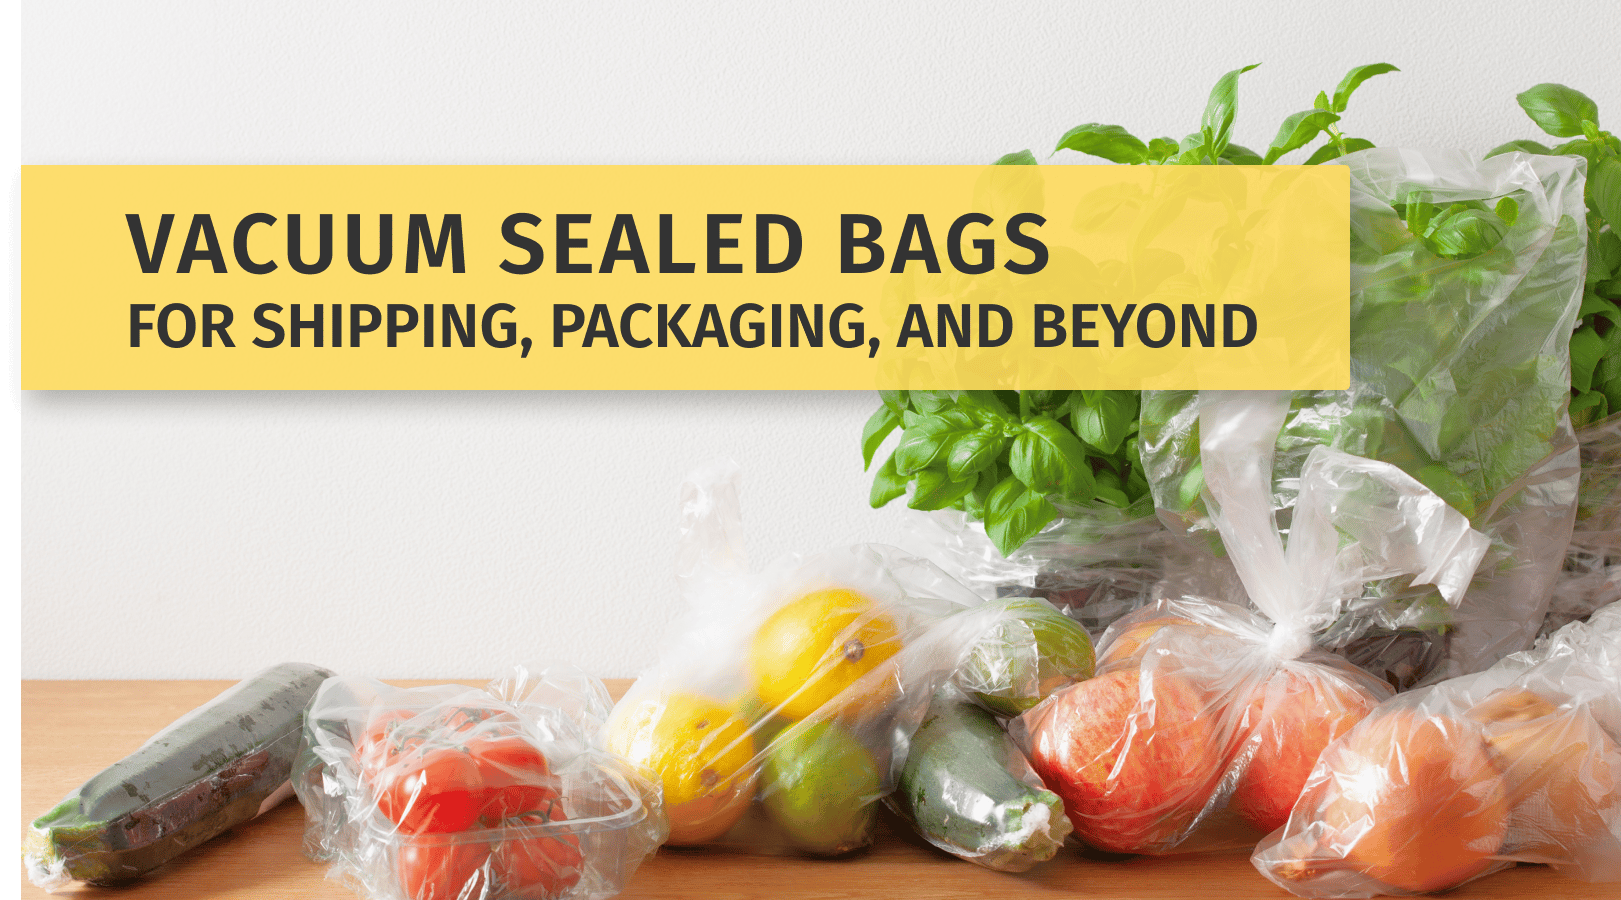 Vacuum Sealed Bags for Shipping, Packaging, and Beyond